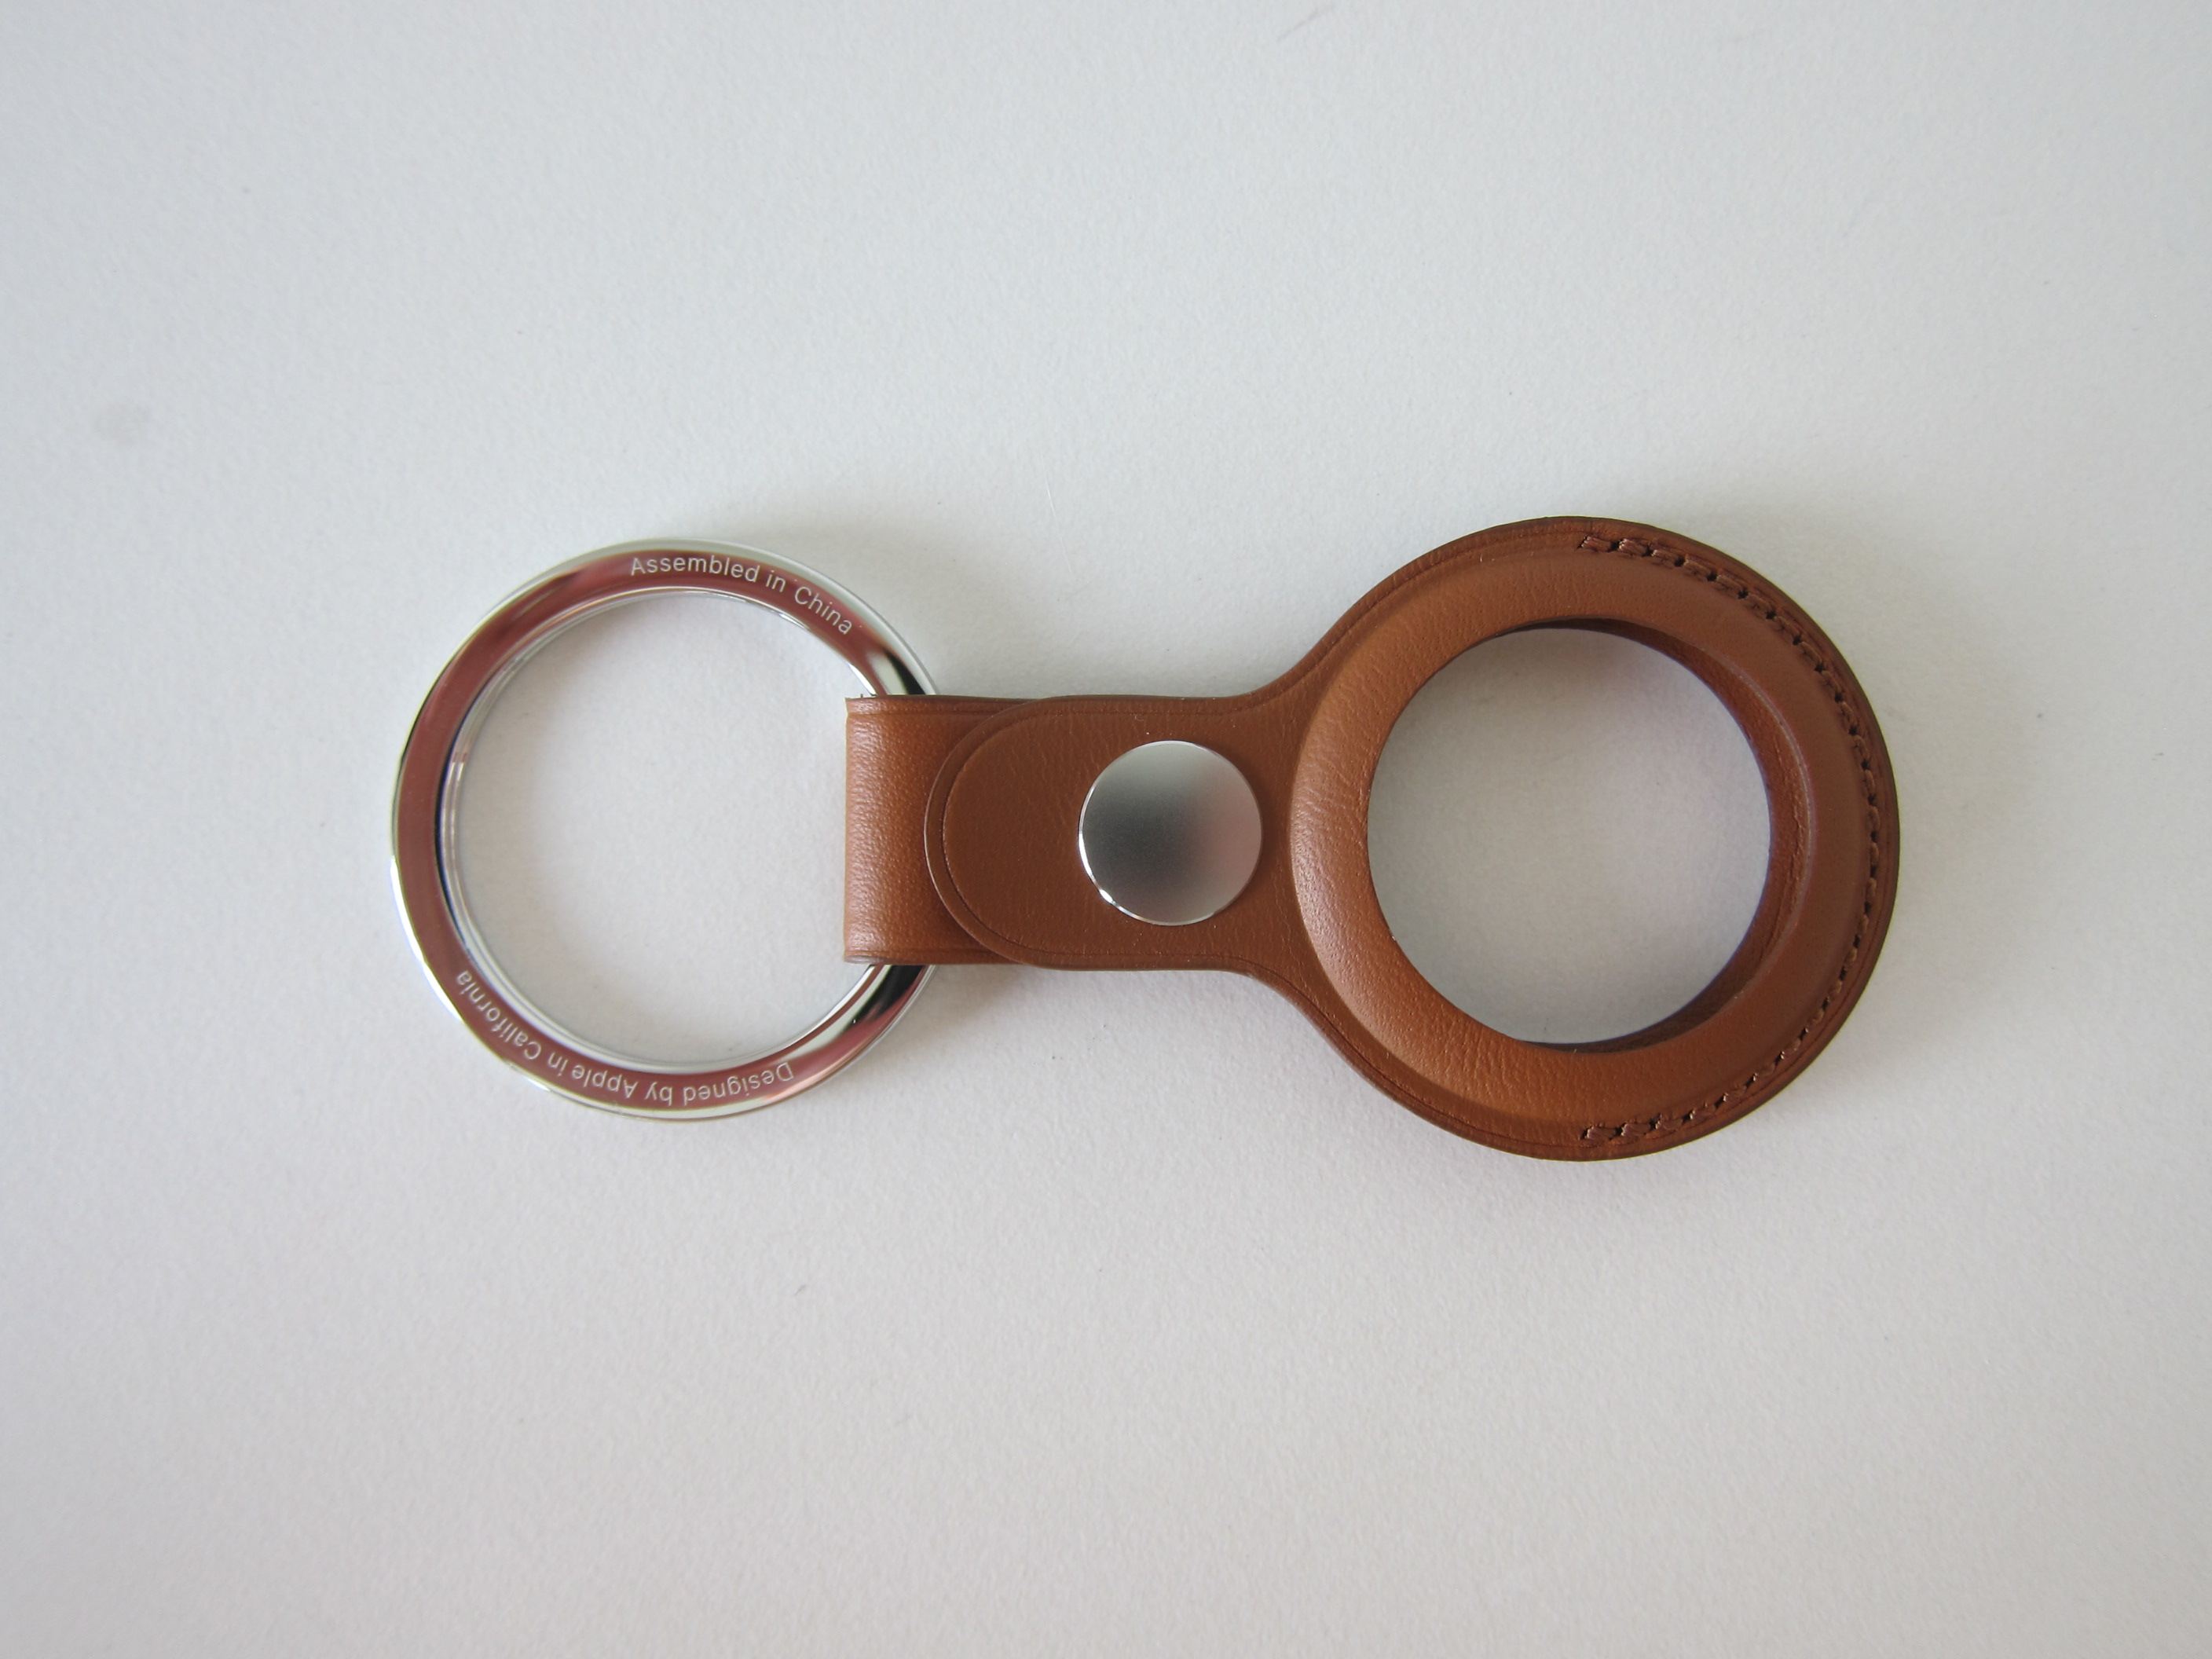 Apple AirTag Leather Key Ring « Blog